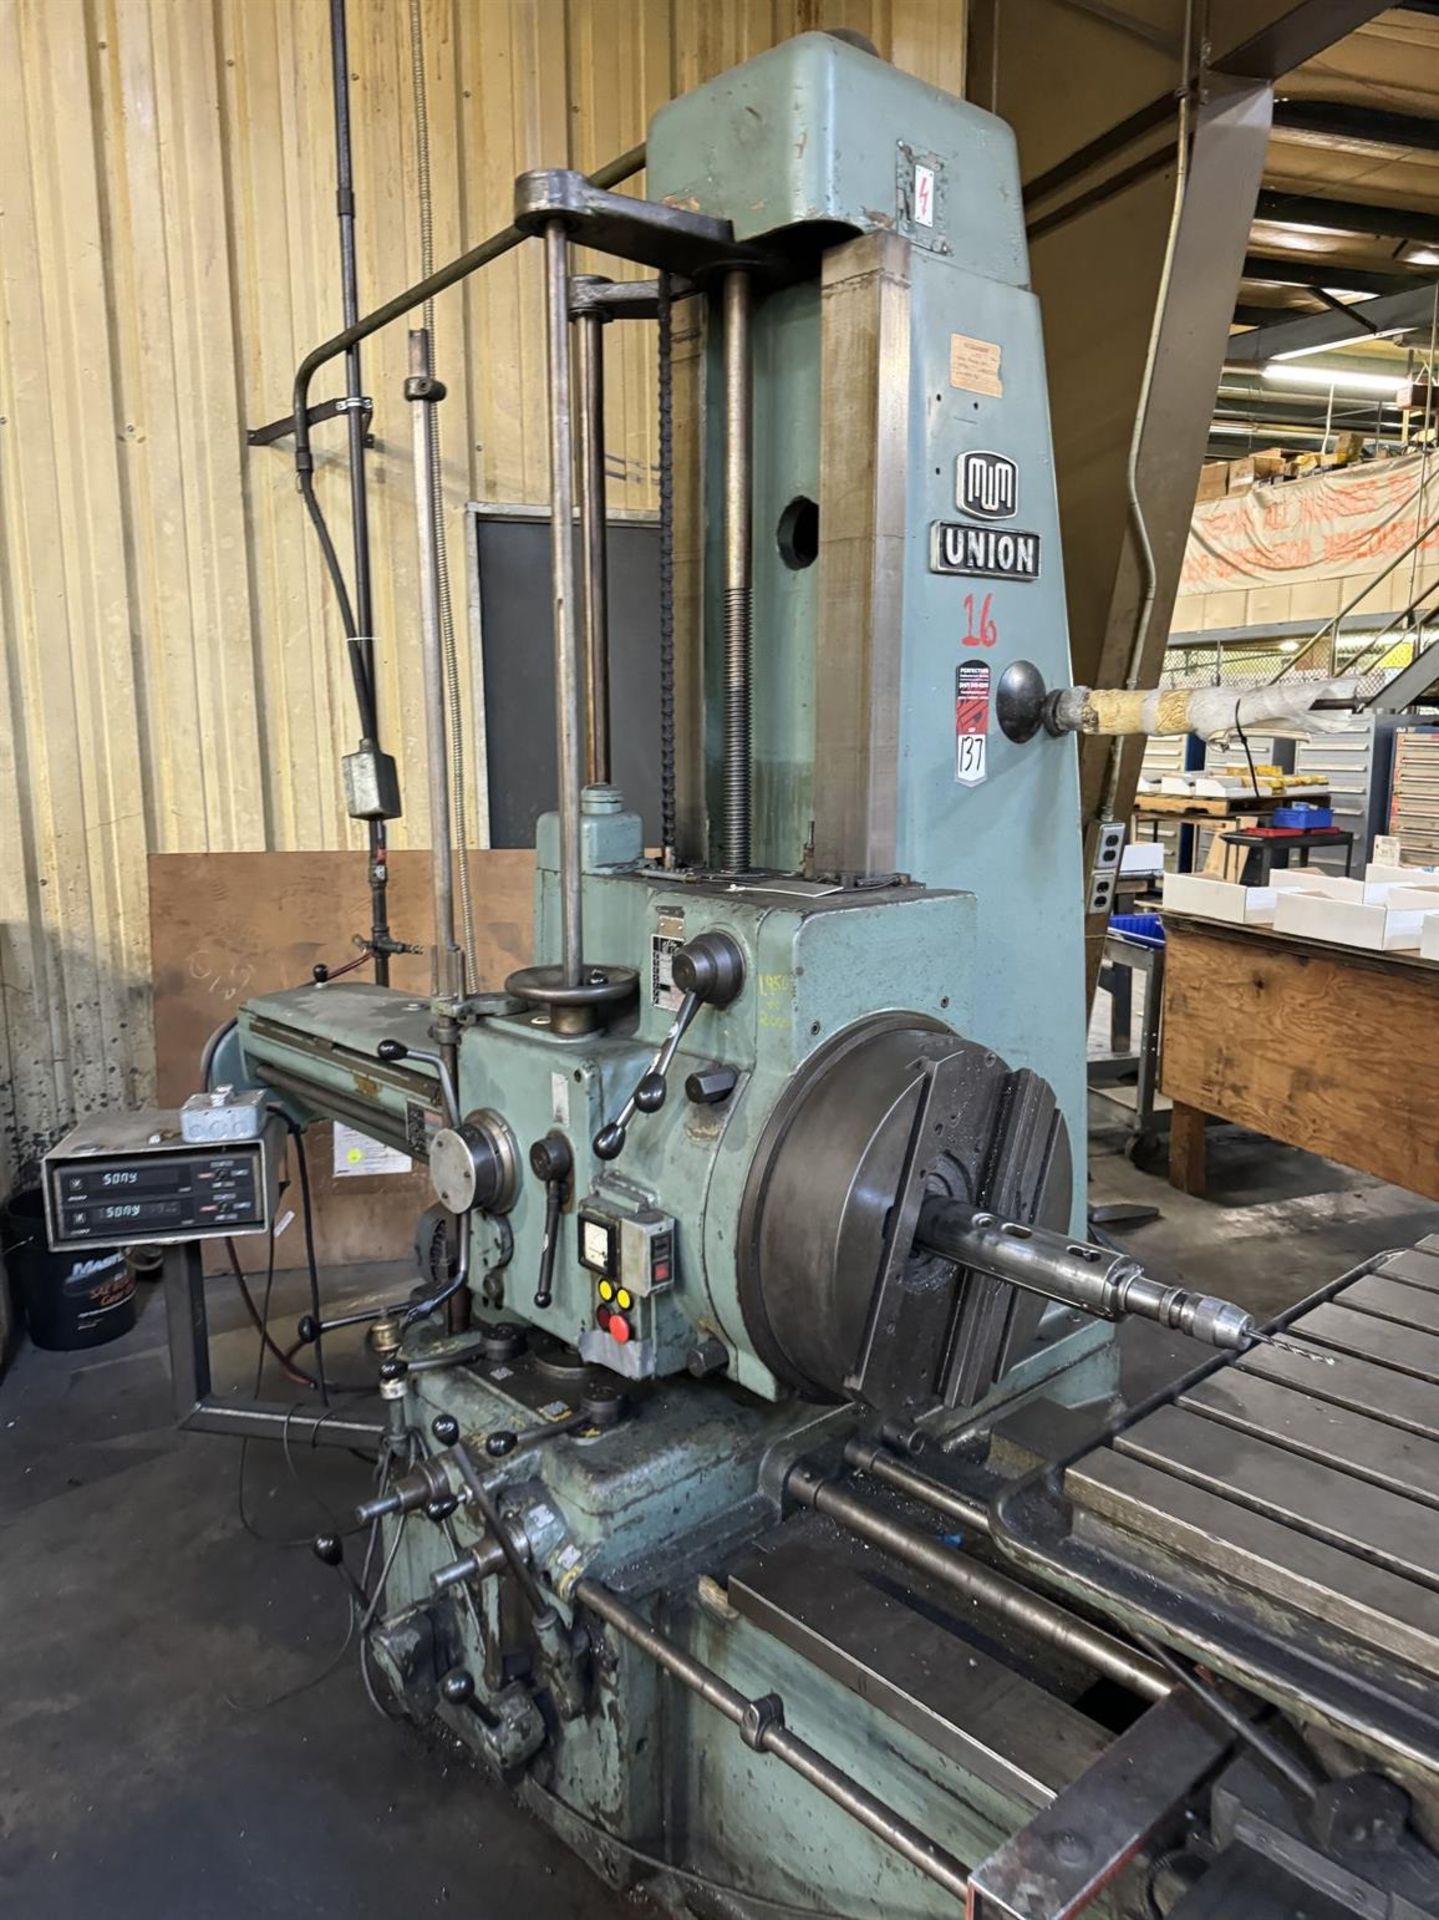 UNION BFT80 4" Horizontal Boring Mill, s/n 24763, 35" x 44" Table, 19" Facing Head, 48"X, 36"Y, 18" - Image 5 of 10